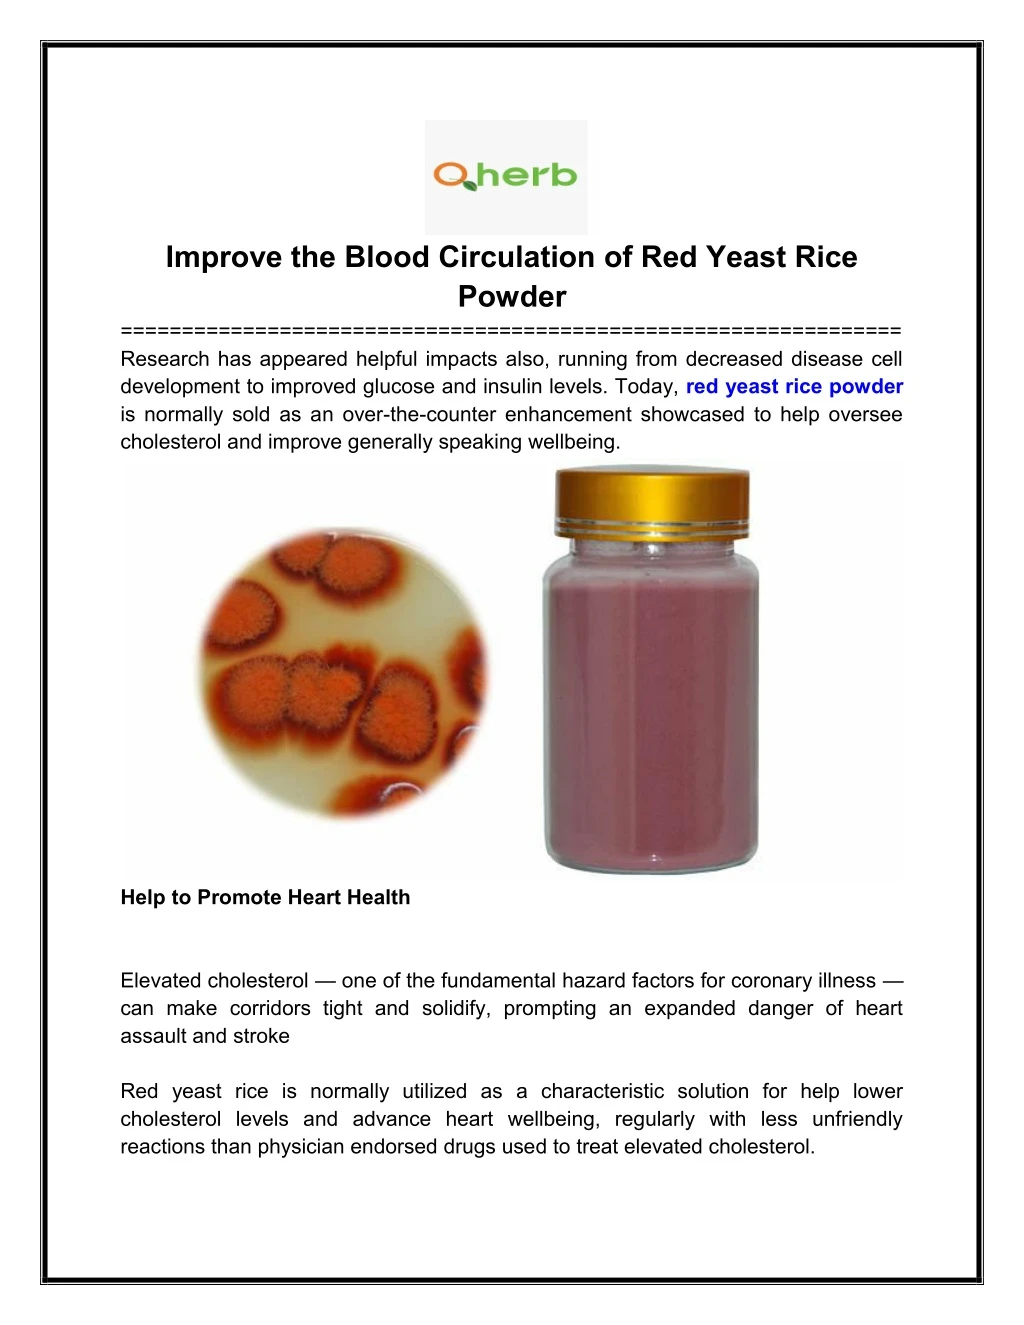 improve the blood circulation of red yeast rice